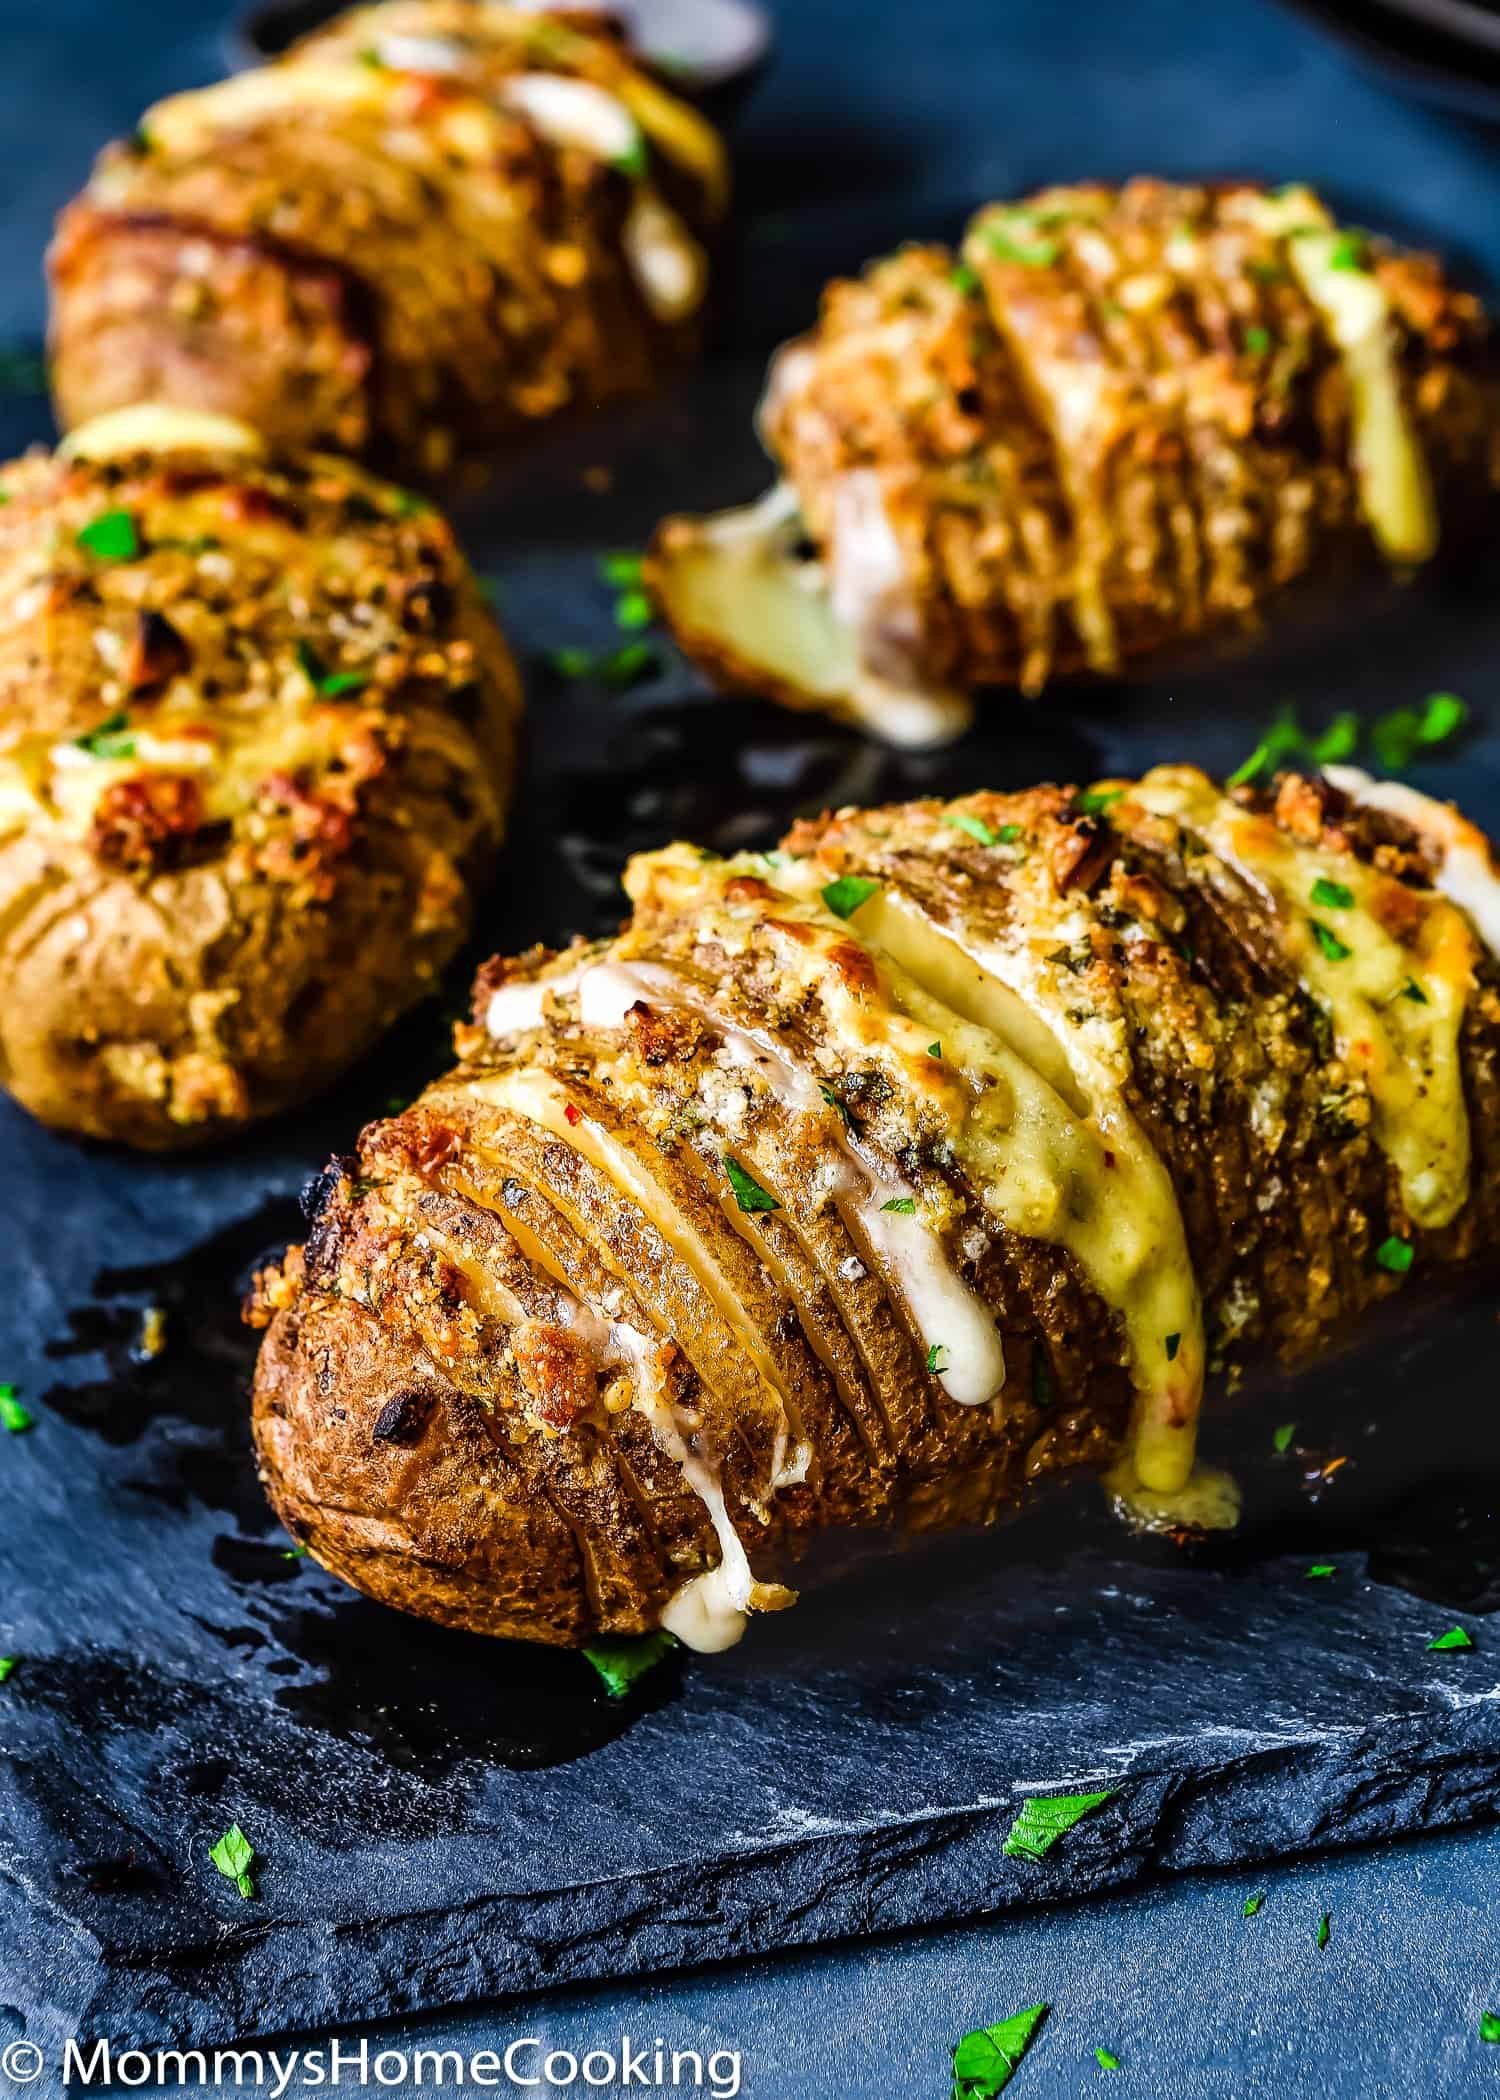 Easy Cheesy Garlic Hasselback Potatoes on a stone serving plate